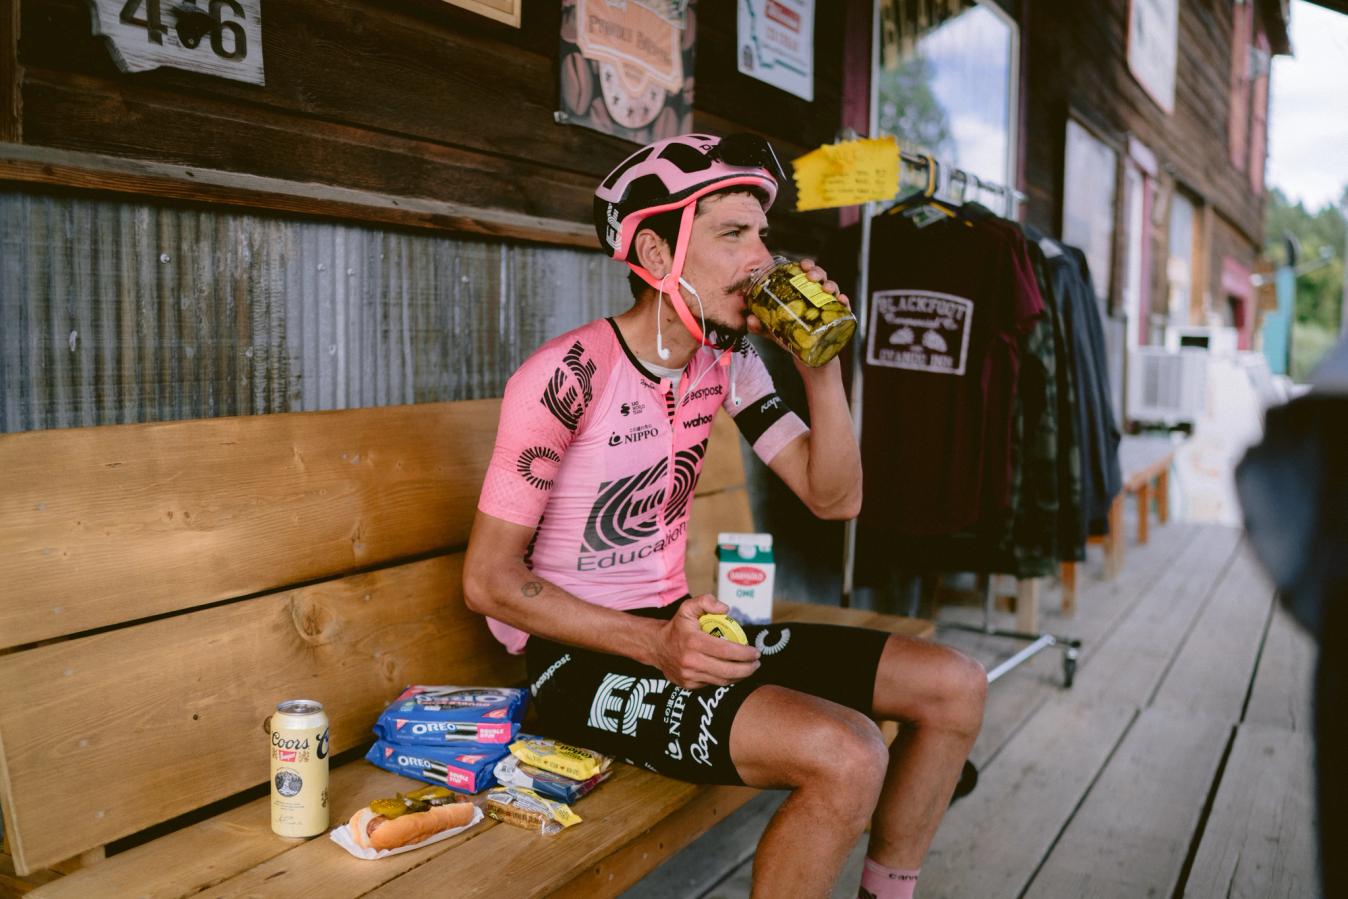 Lachlan Morton's famous feed from day 3 of his Tour Divide ride